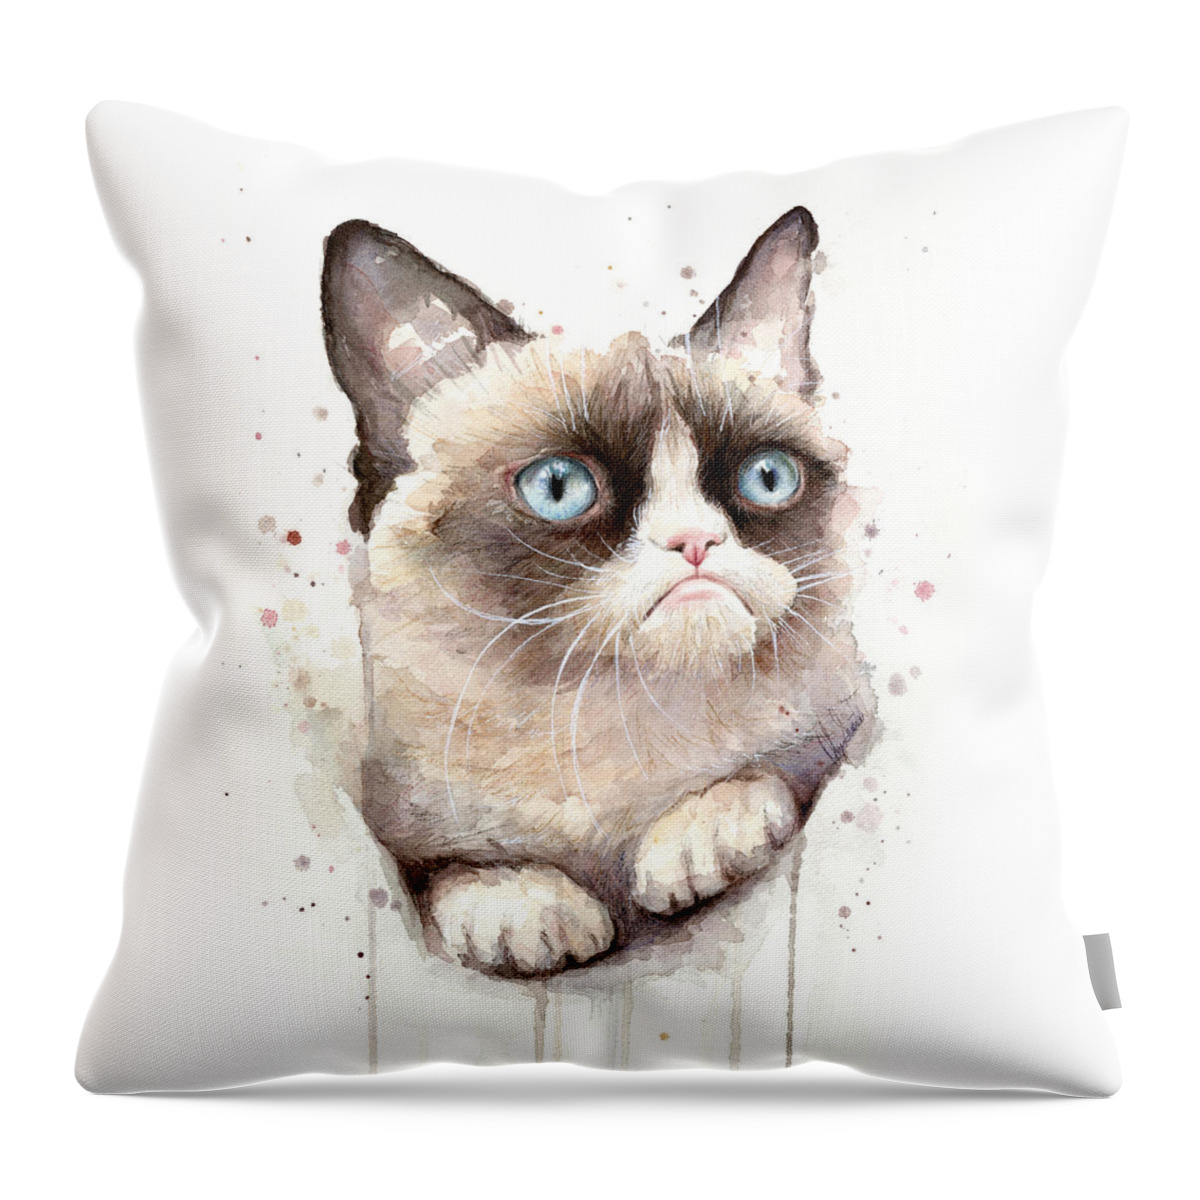 Grumpy Throw Pillow featuring the painting Grumpy Cat Watercolor by Olga Shvartsur